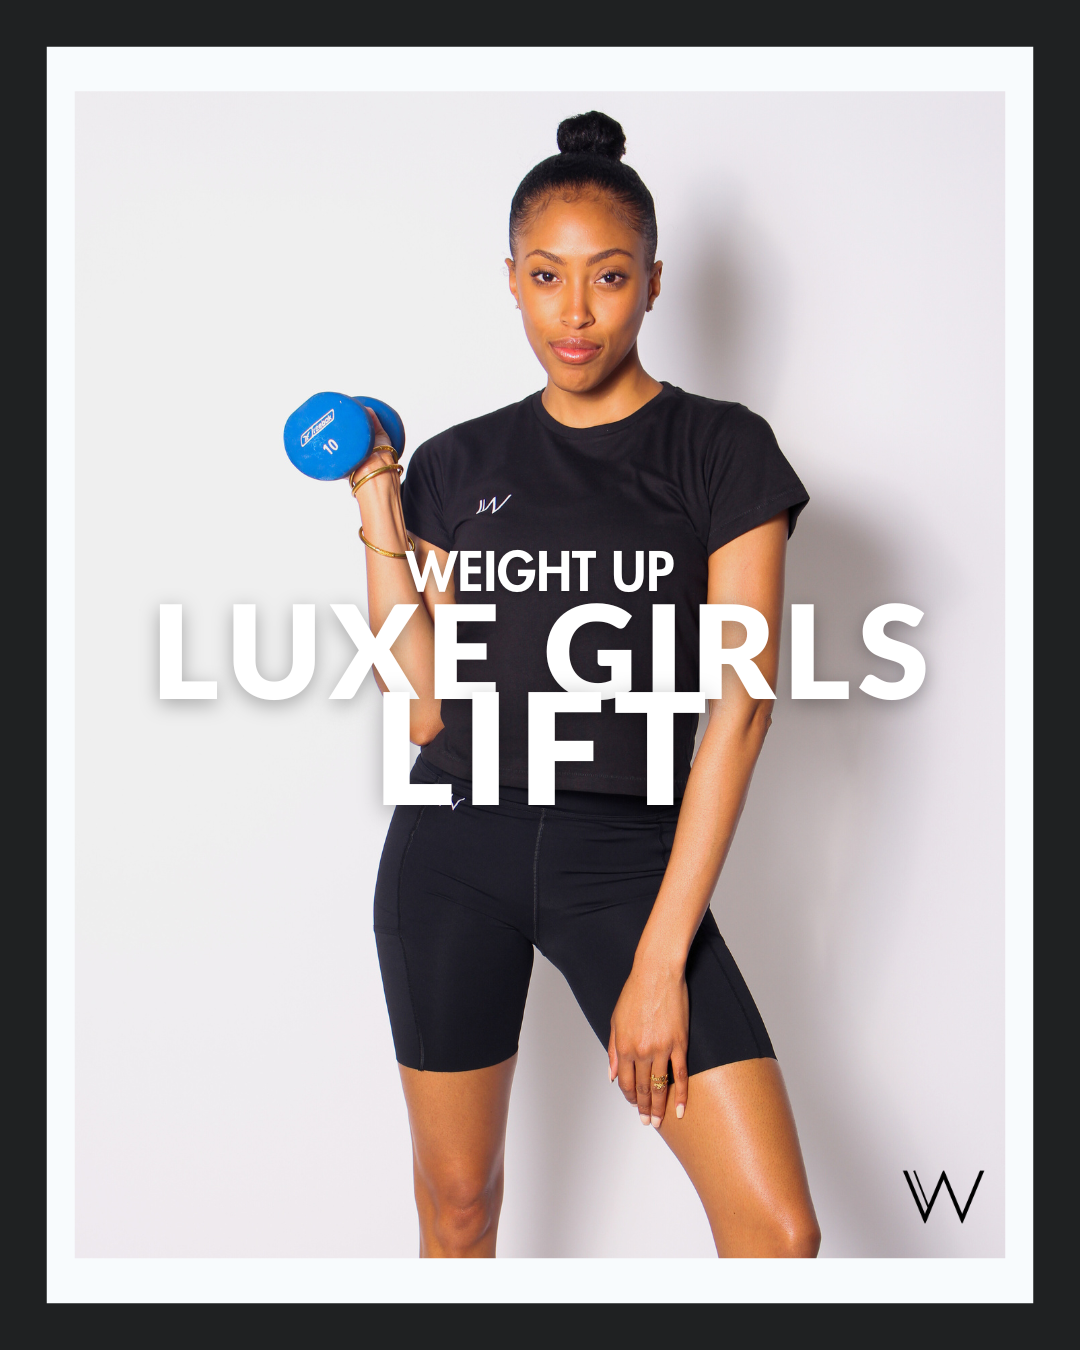 For the Luxe Girls who Lift